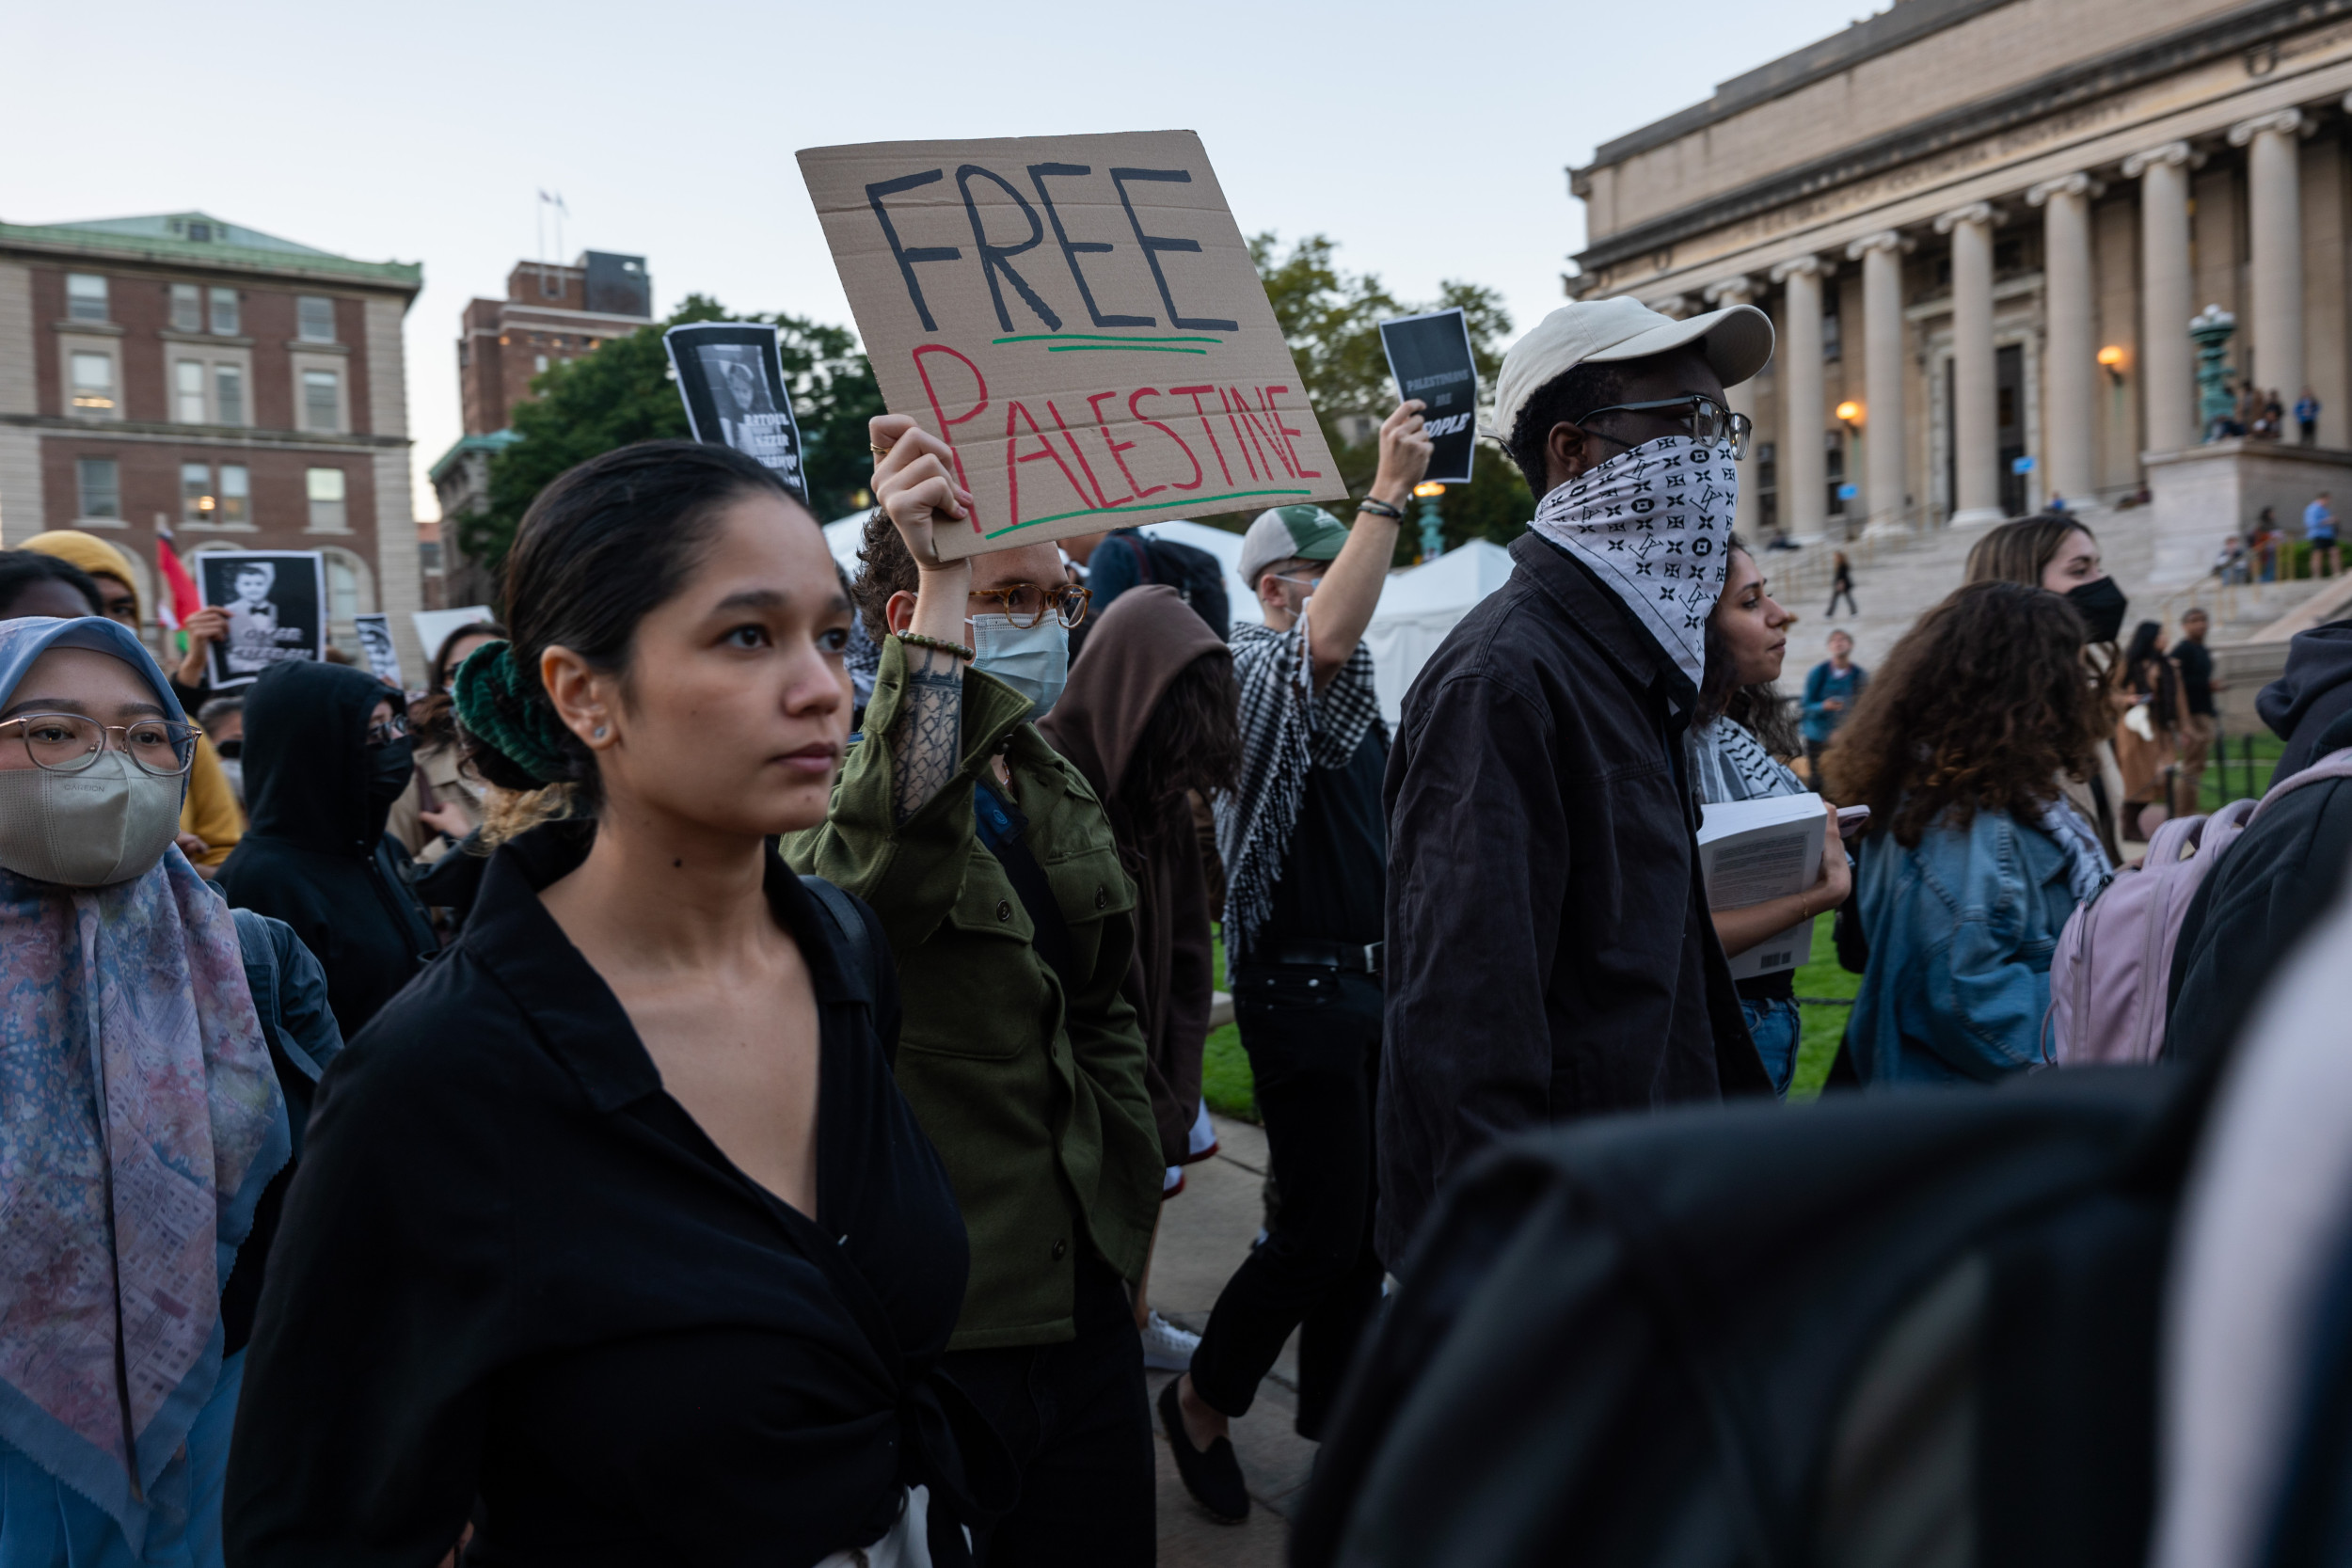 As a Columbia Grad, I Oppose This Latest On-Campus Activism